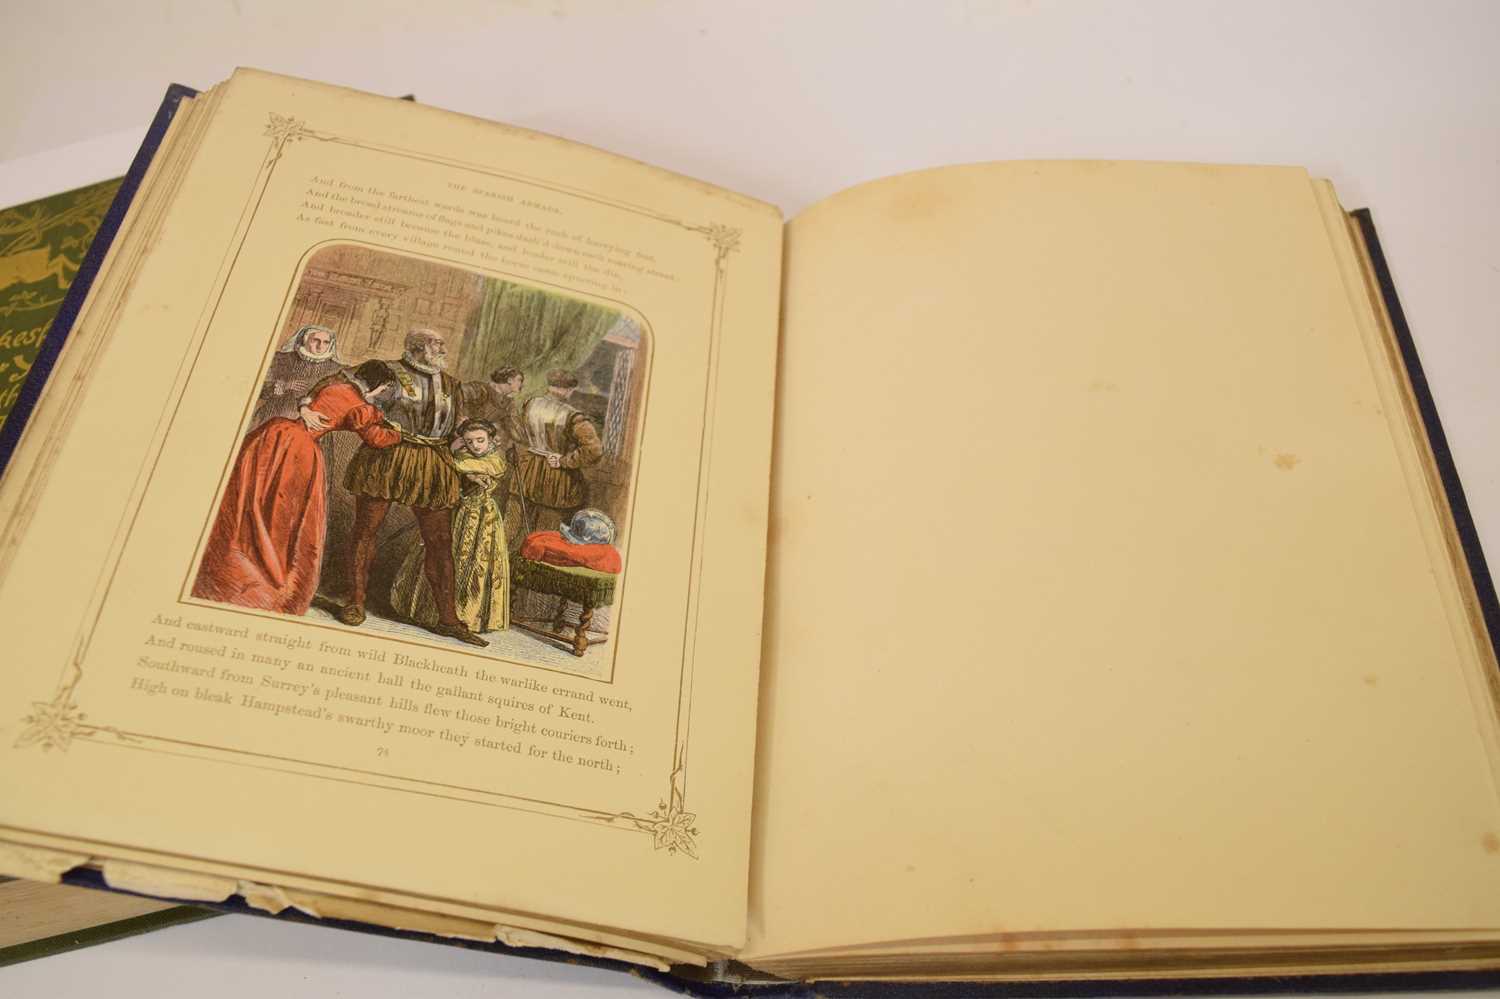 Potter, Beatrix - 'Cecily Parsley's Nursery Rhymes' - First edition - Image 36 of 37